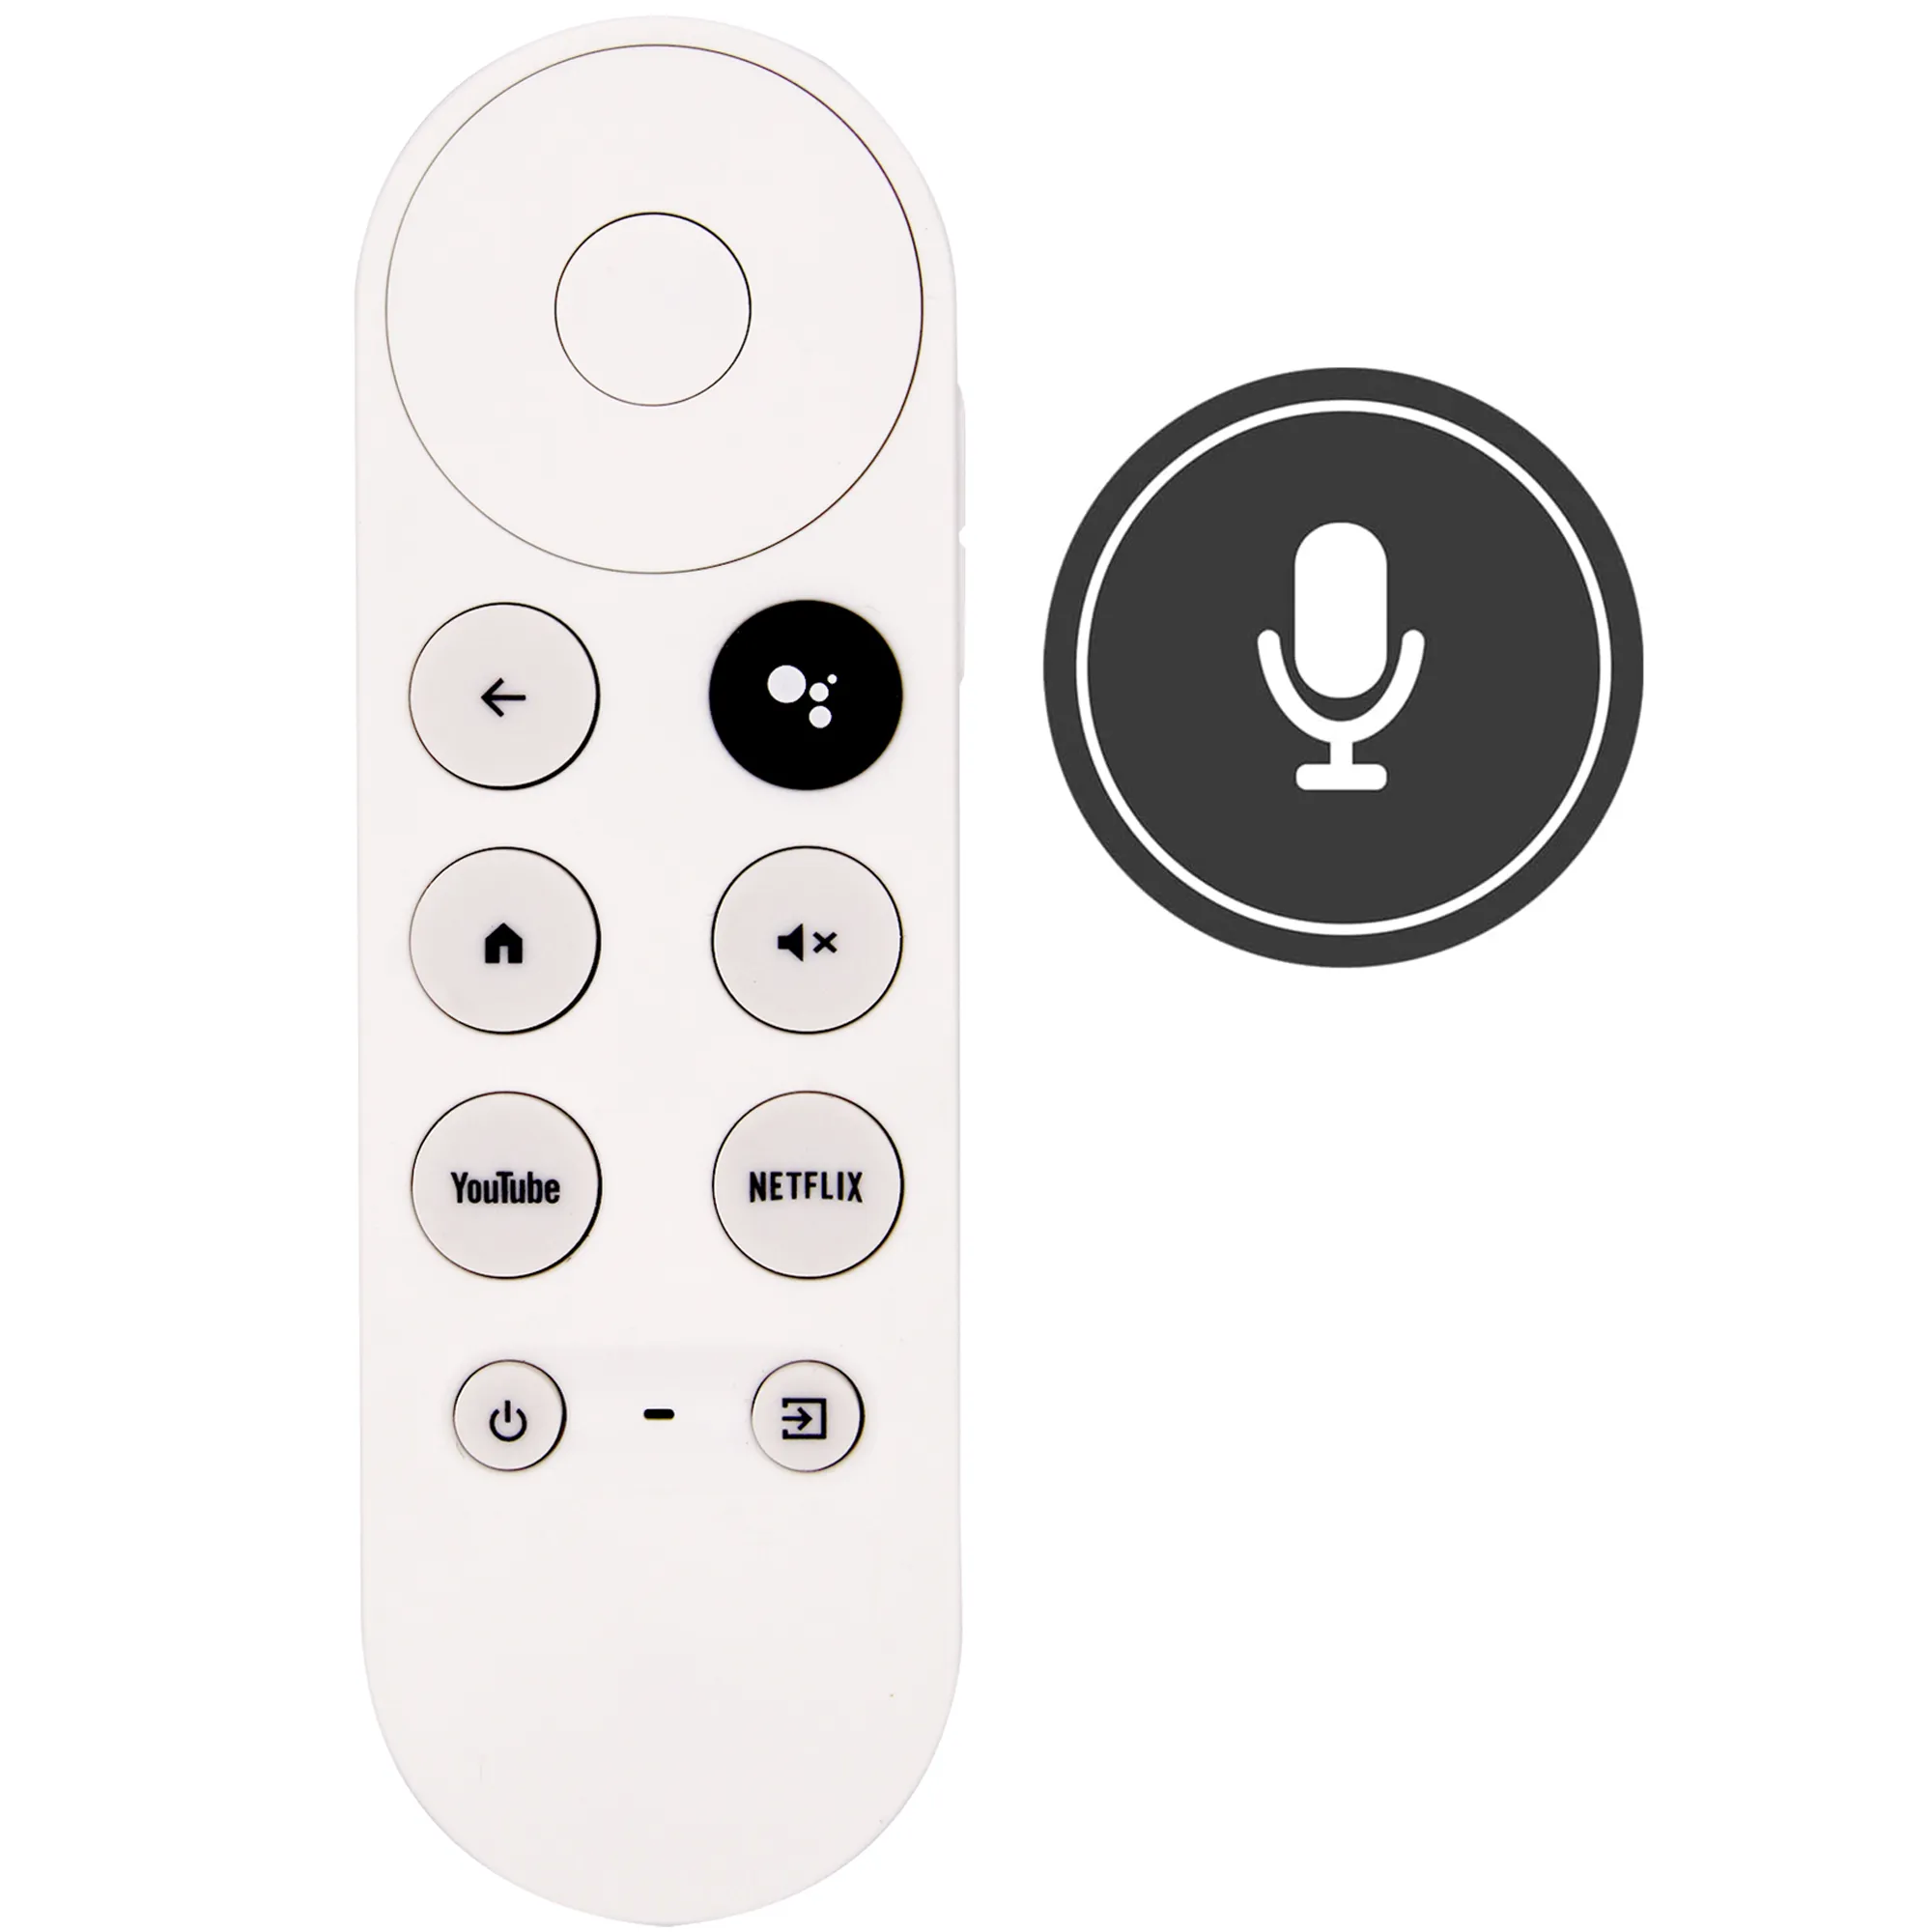 New G9N9N Voice Remote Control Replacement for Google Chromecast 4K Snow  GA01920-US, for GA01923-US, for GA01919-US Bluetooth Voice Google  Chromecast